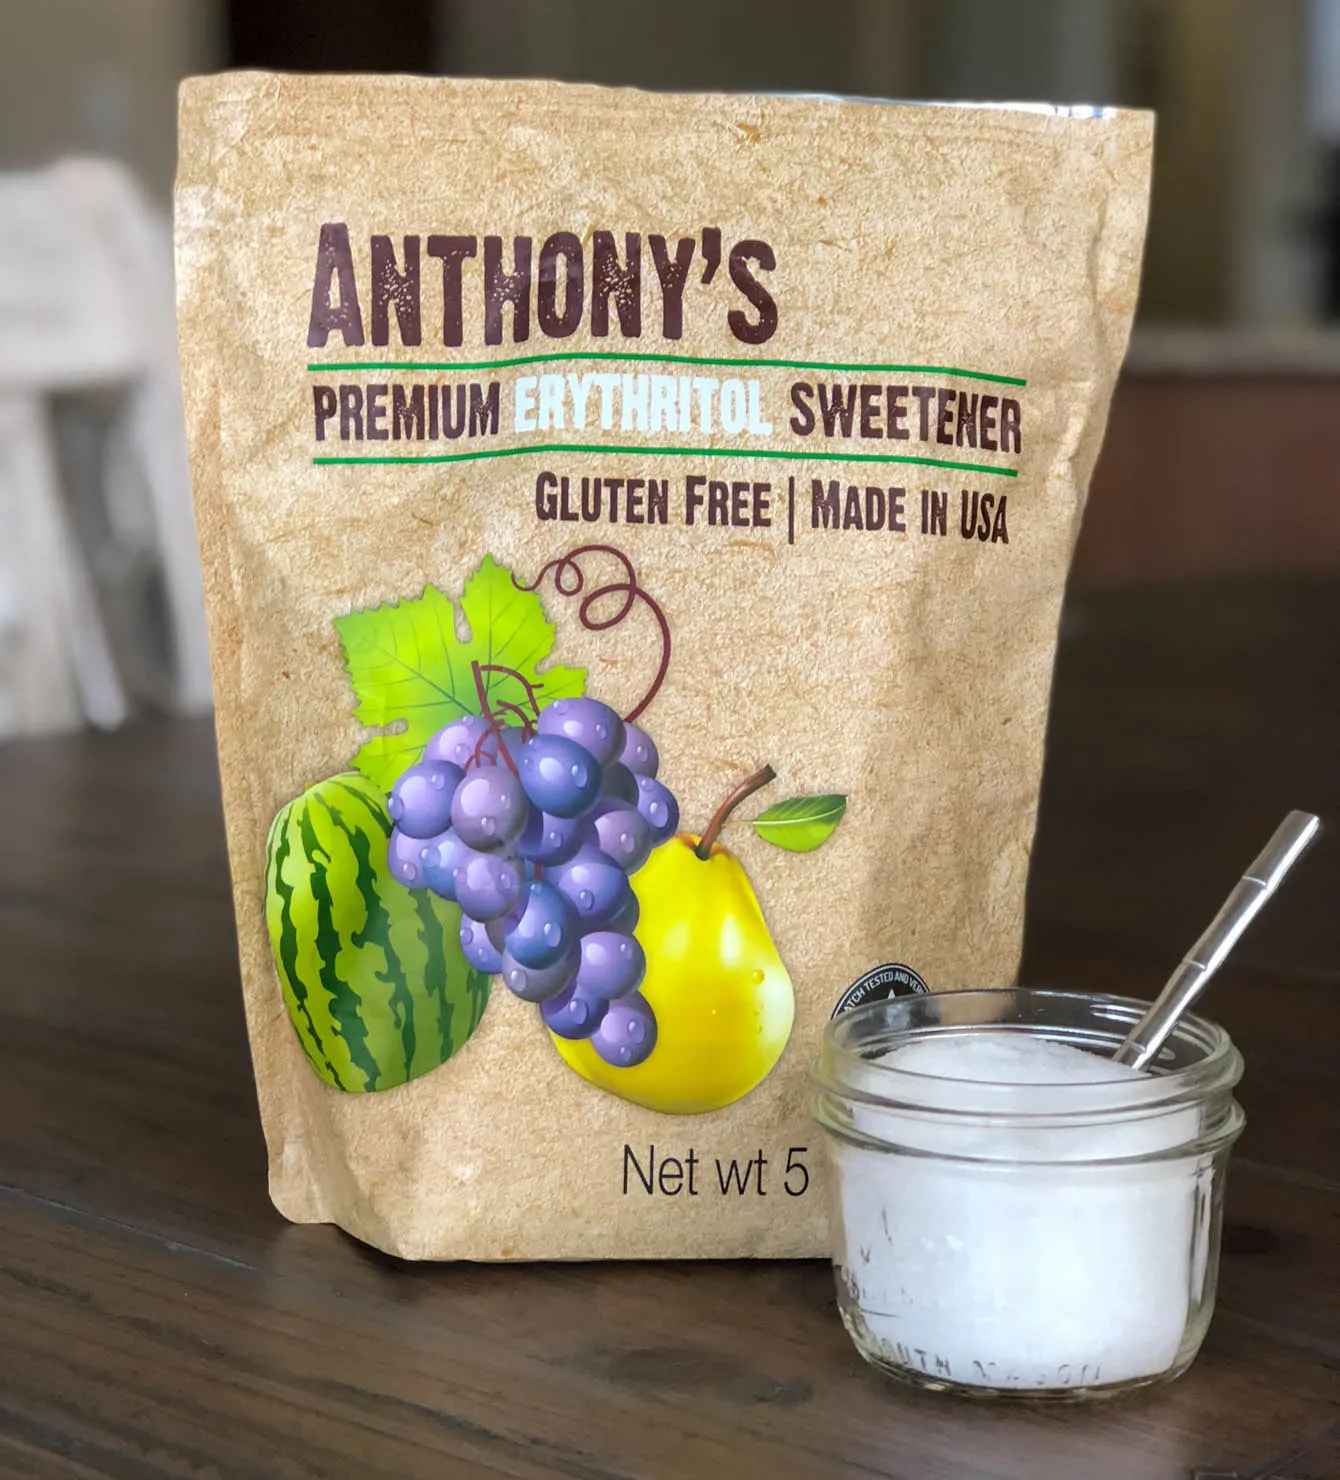 Anthony's Erythritol Sweetener 5lbs. - for keto diet